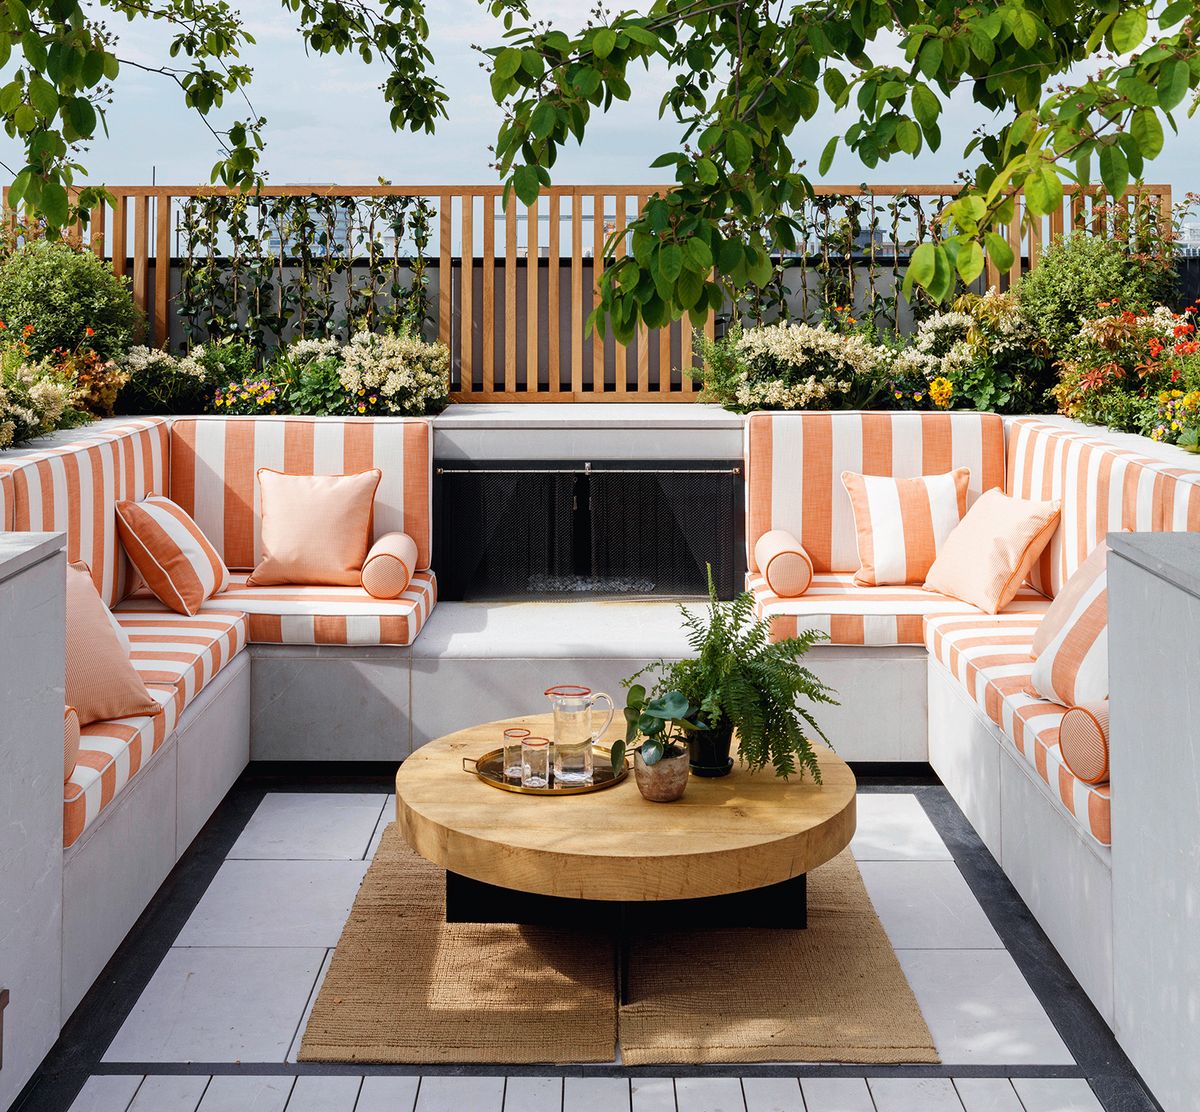 Outdoor living room ideas – design and decor for relaxing